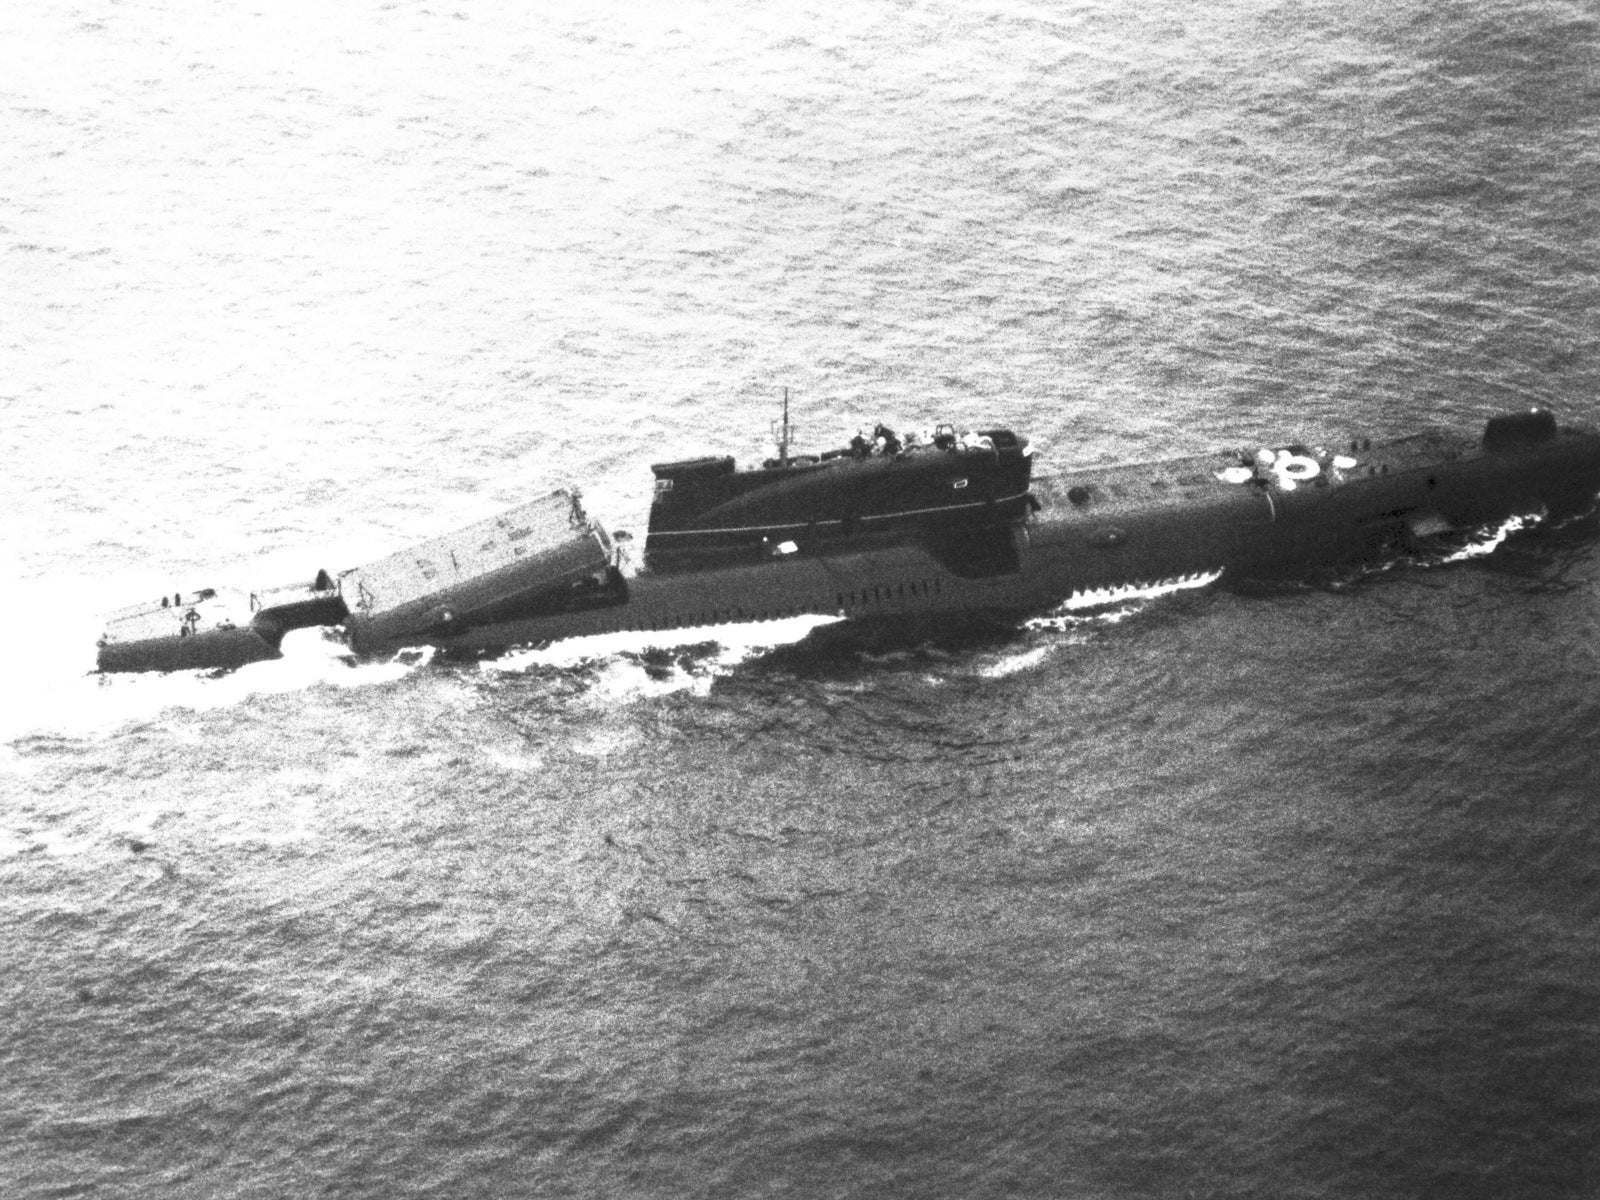 An elevated starboard beam view of a Soviet Juliett class cruise missile submarine underway with one of its missile launchers in a raised position.